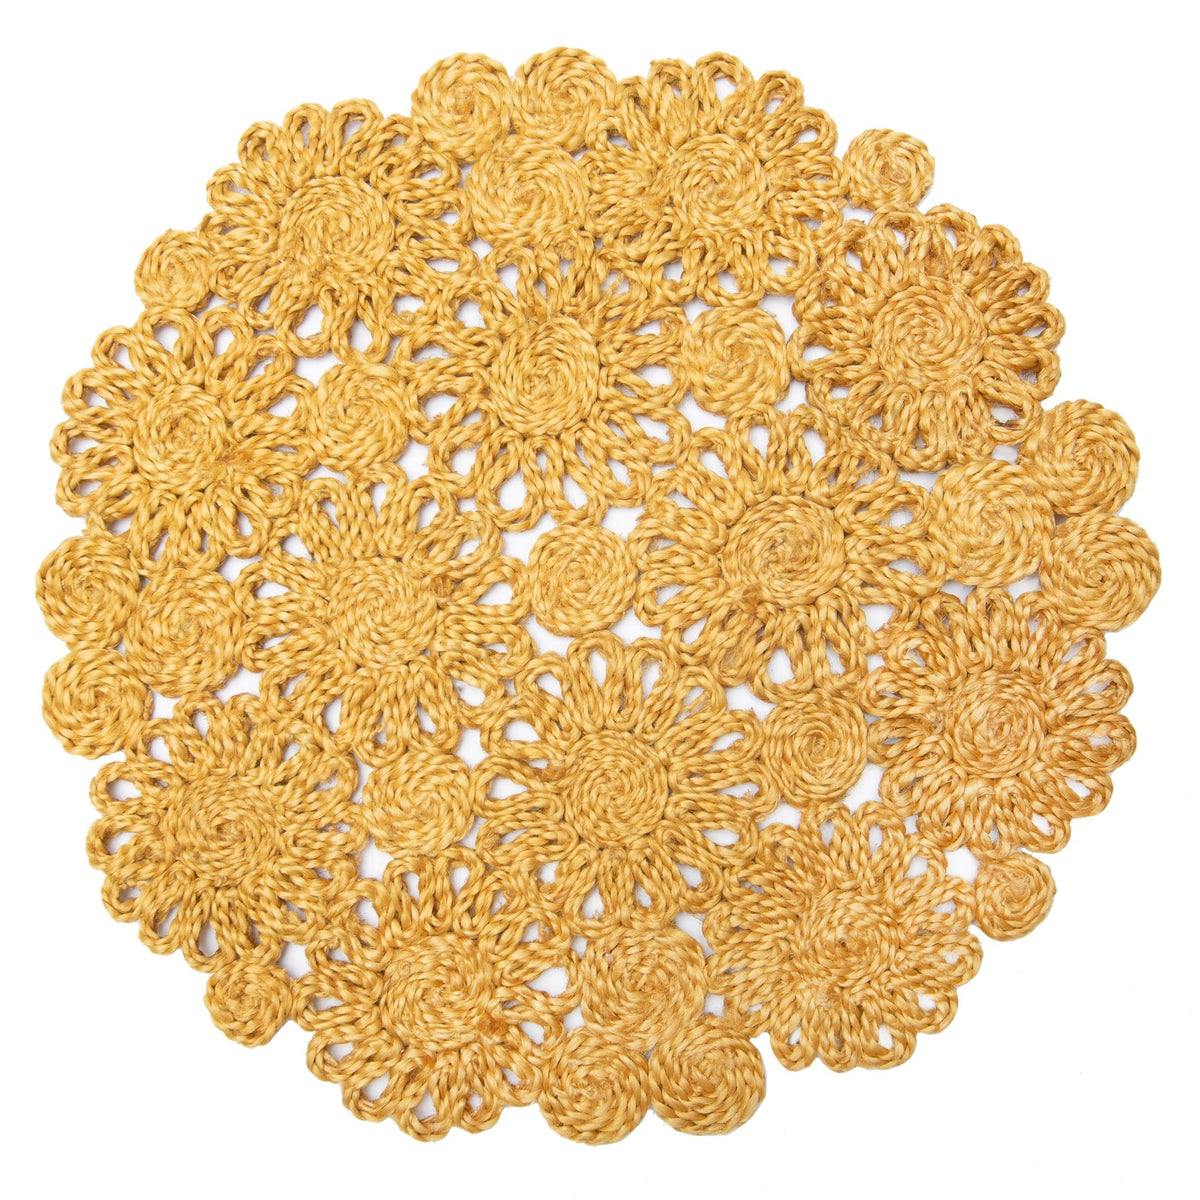 Daisy Jute 15" Round Placemat in Mustard, Set of 4